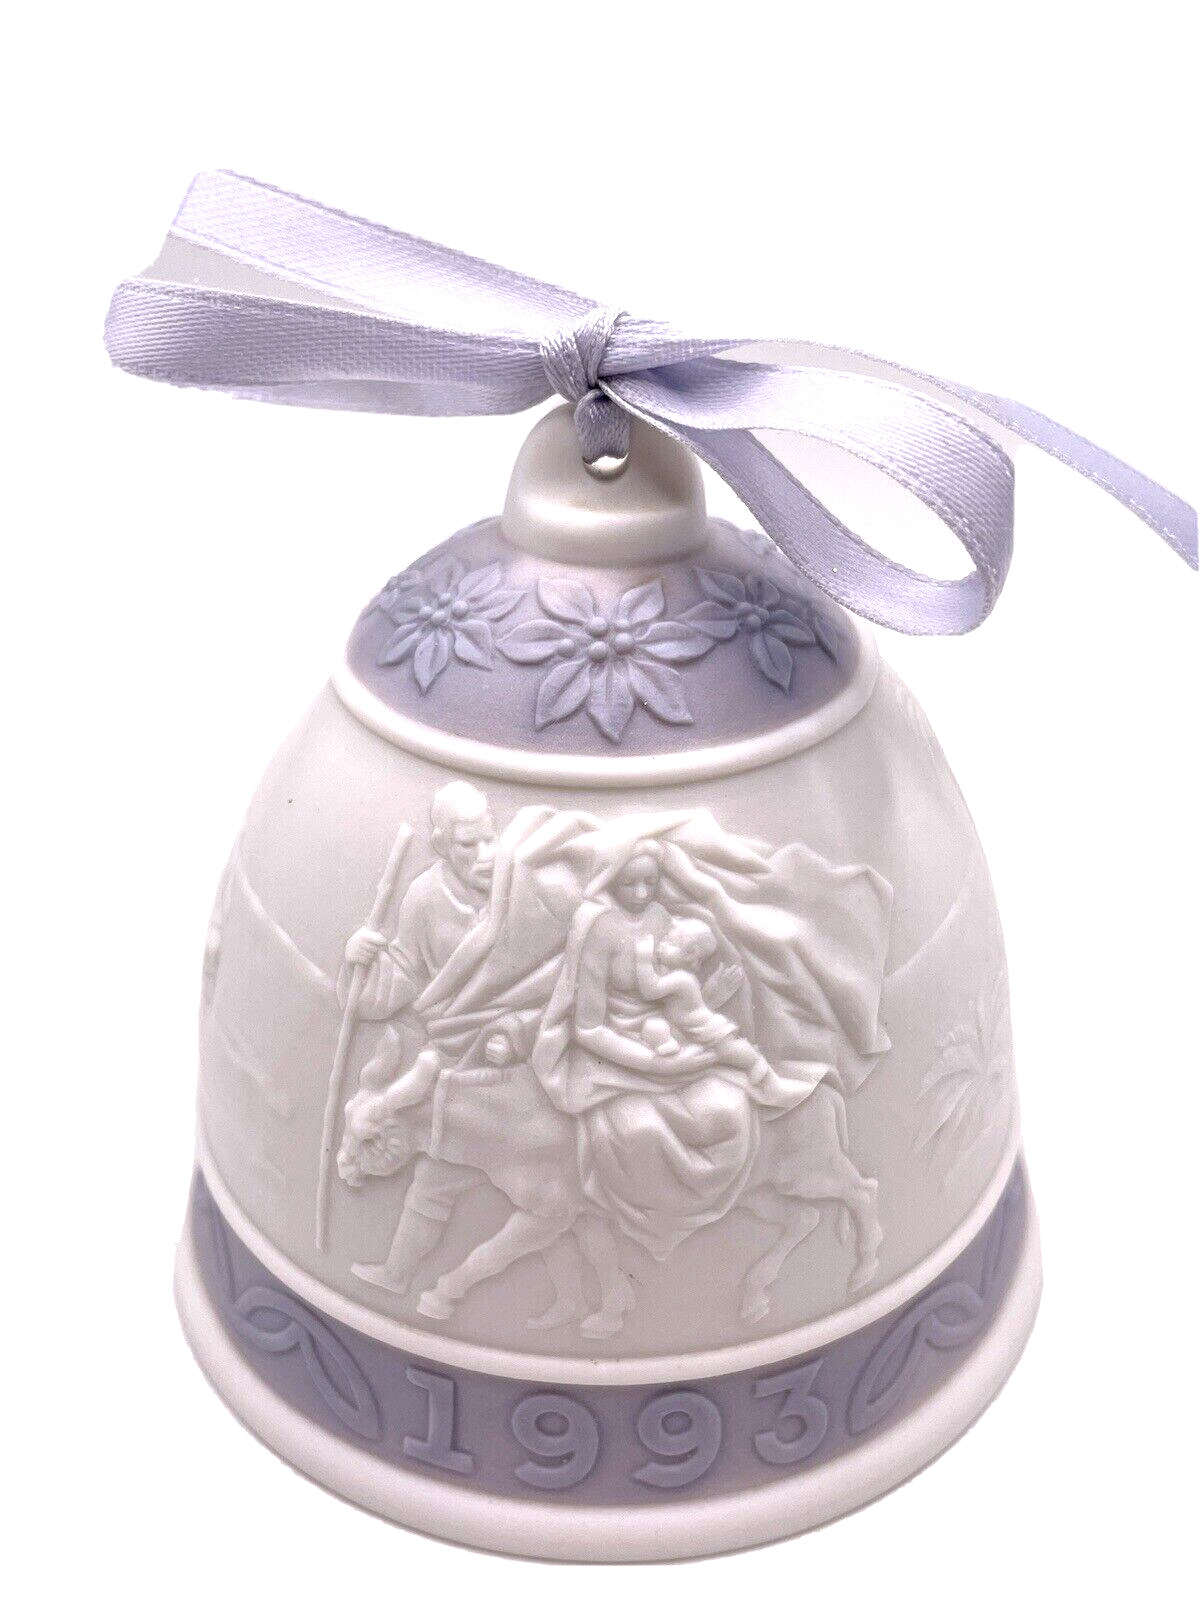 LLADRO Annual CHRISTMAS BELL Ornament 1993 Porcelain #16010 EXC - Made in Spain